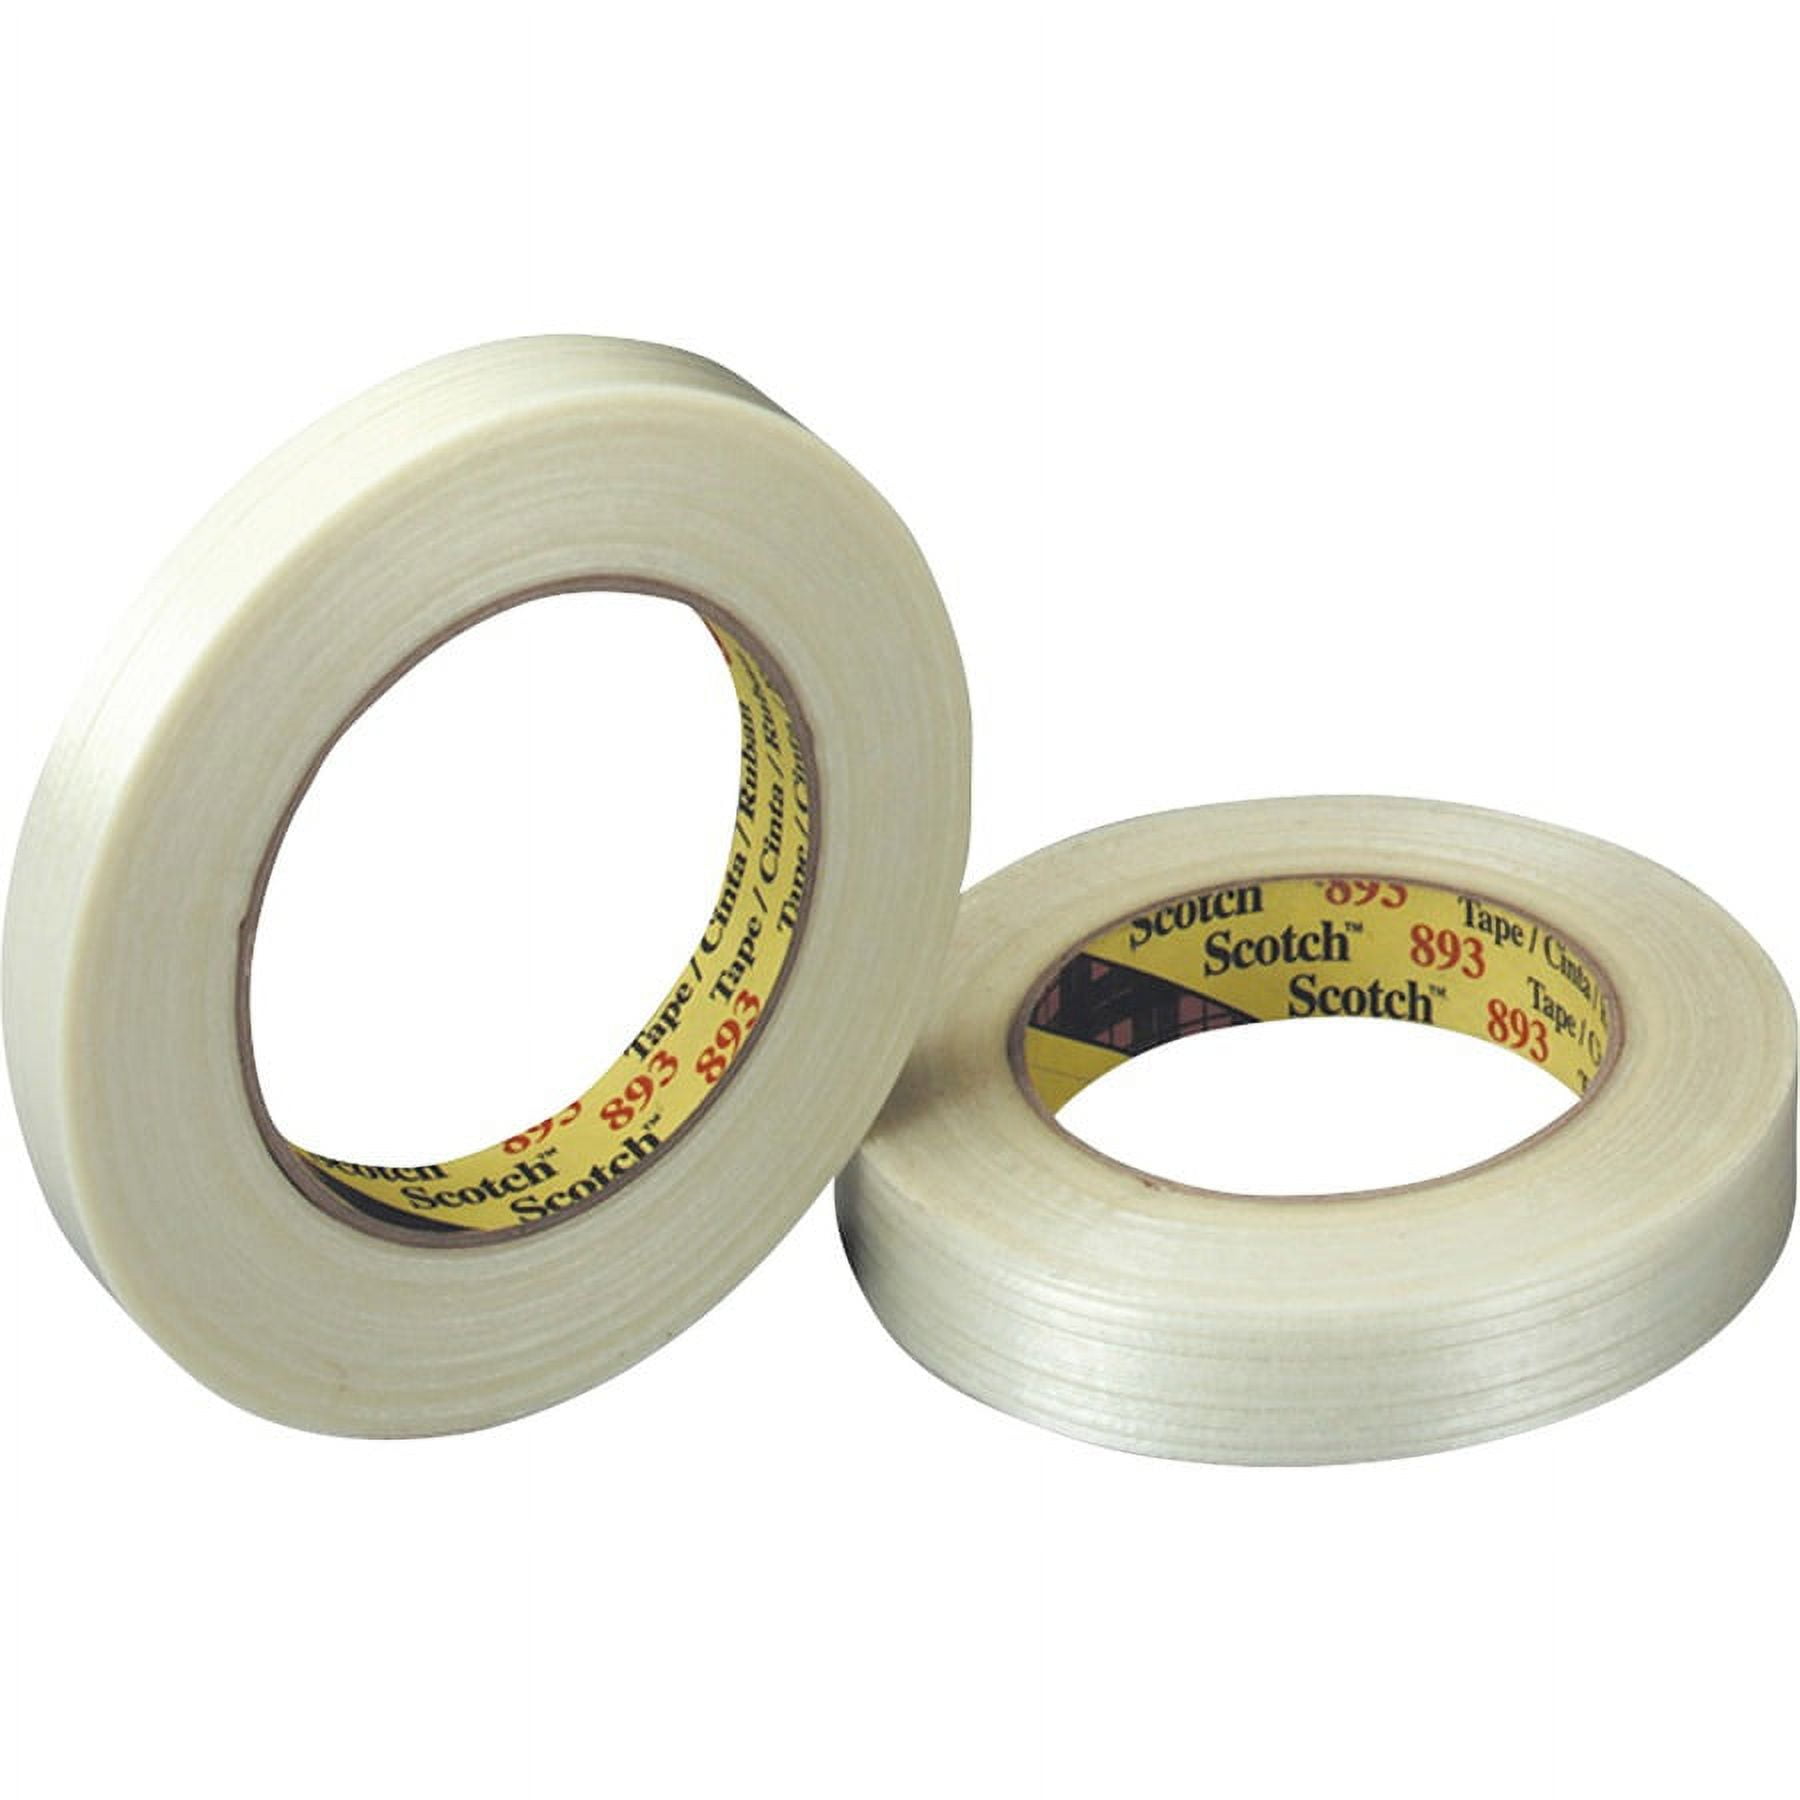 XFasten Transparent Filament Duct Tape, 2 Inches x 30 Yards